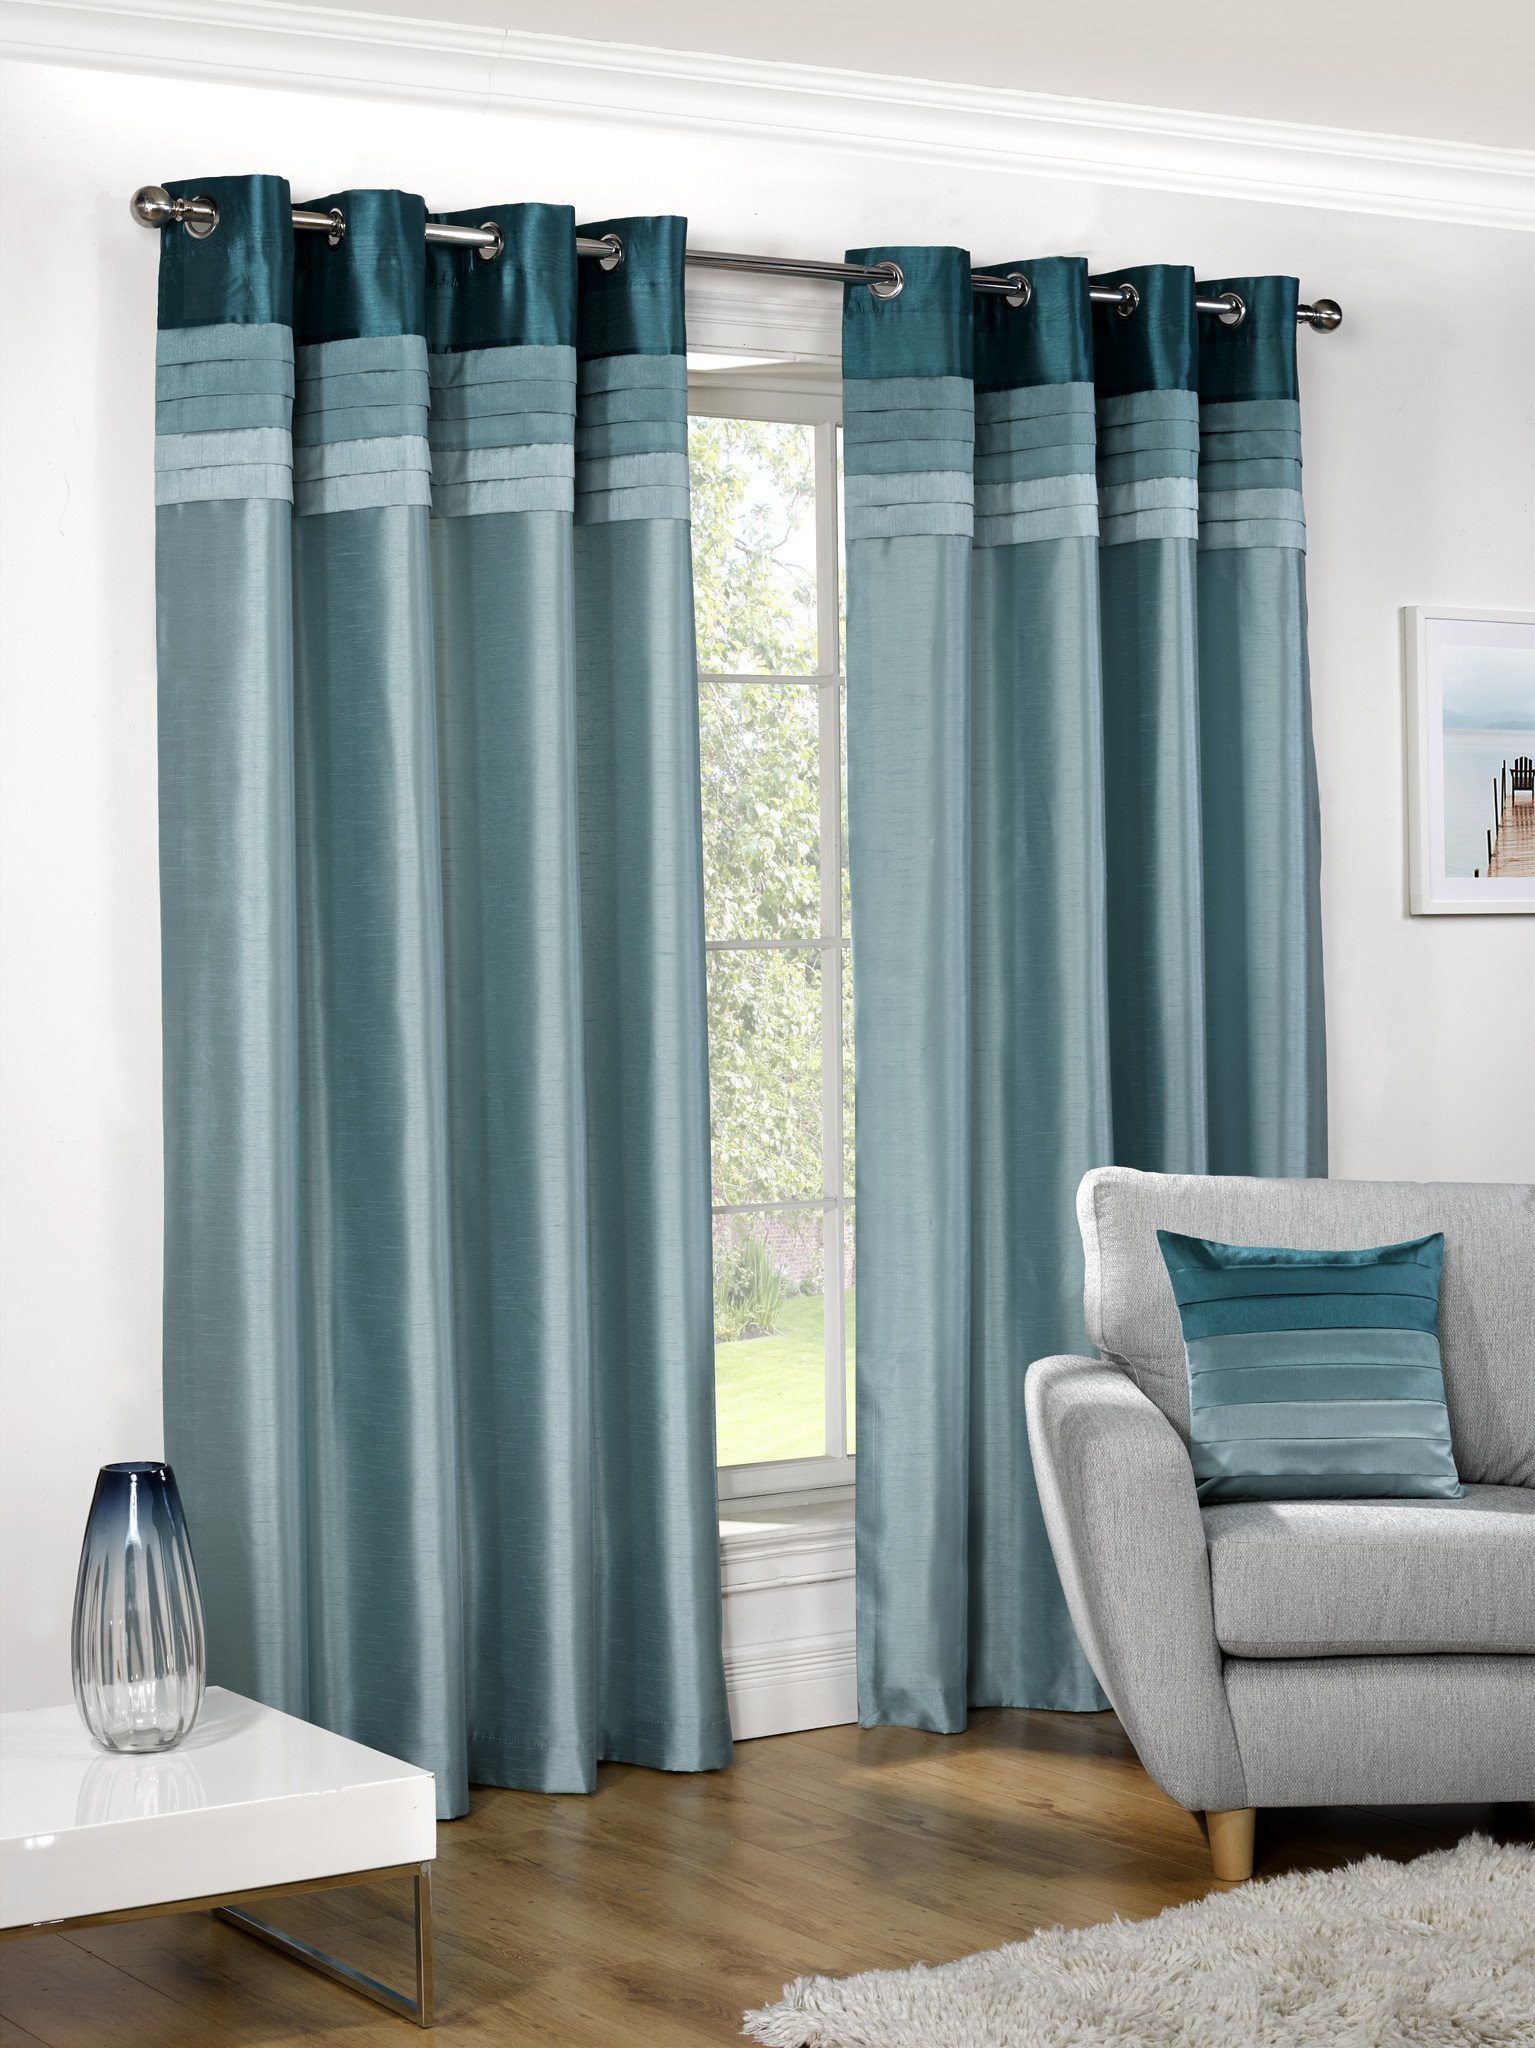 Teal Kitchen Curtains
 Seattle Faux Silk Teal Eyelet Lined Curtains By Hamilton